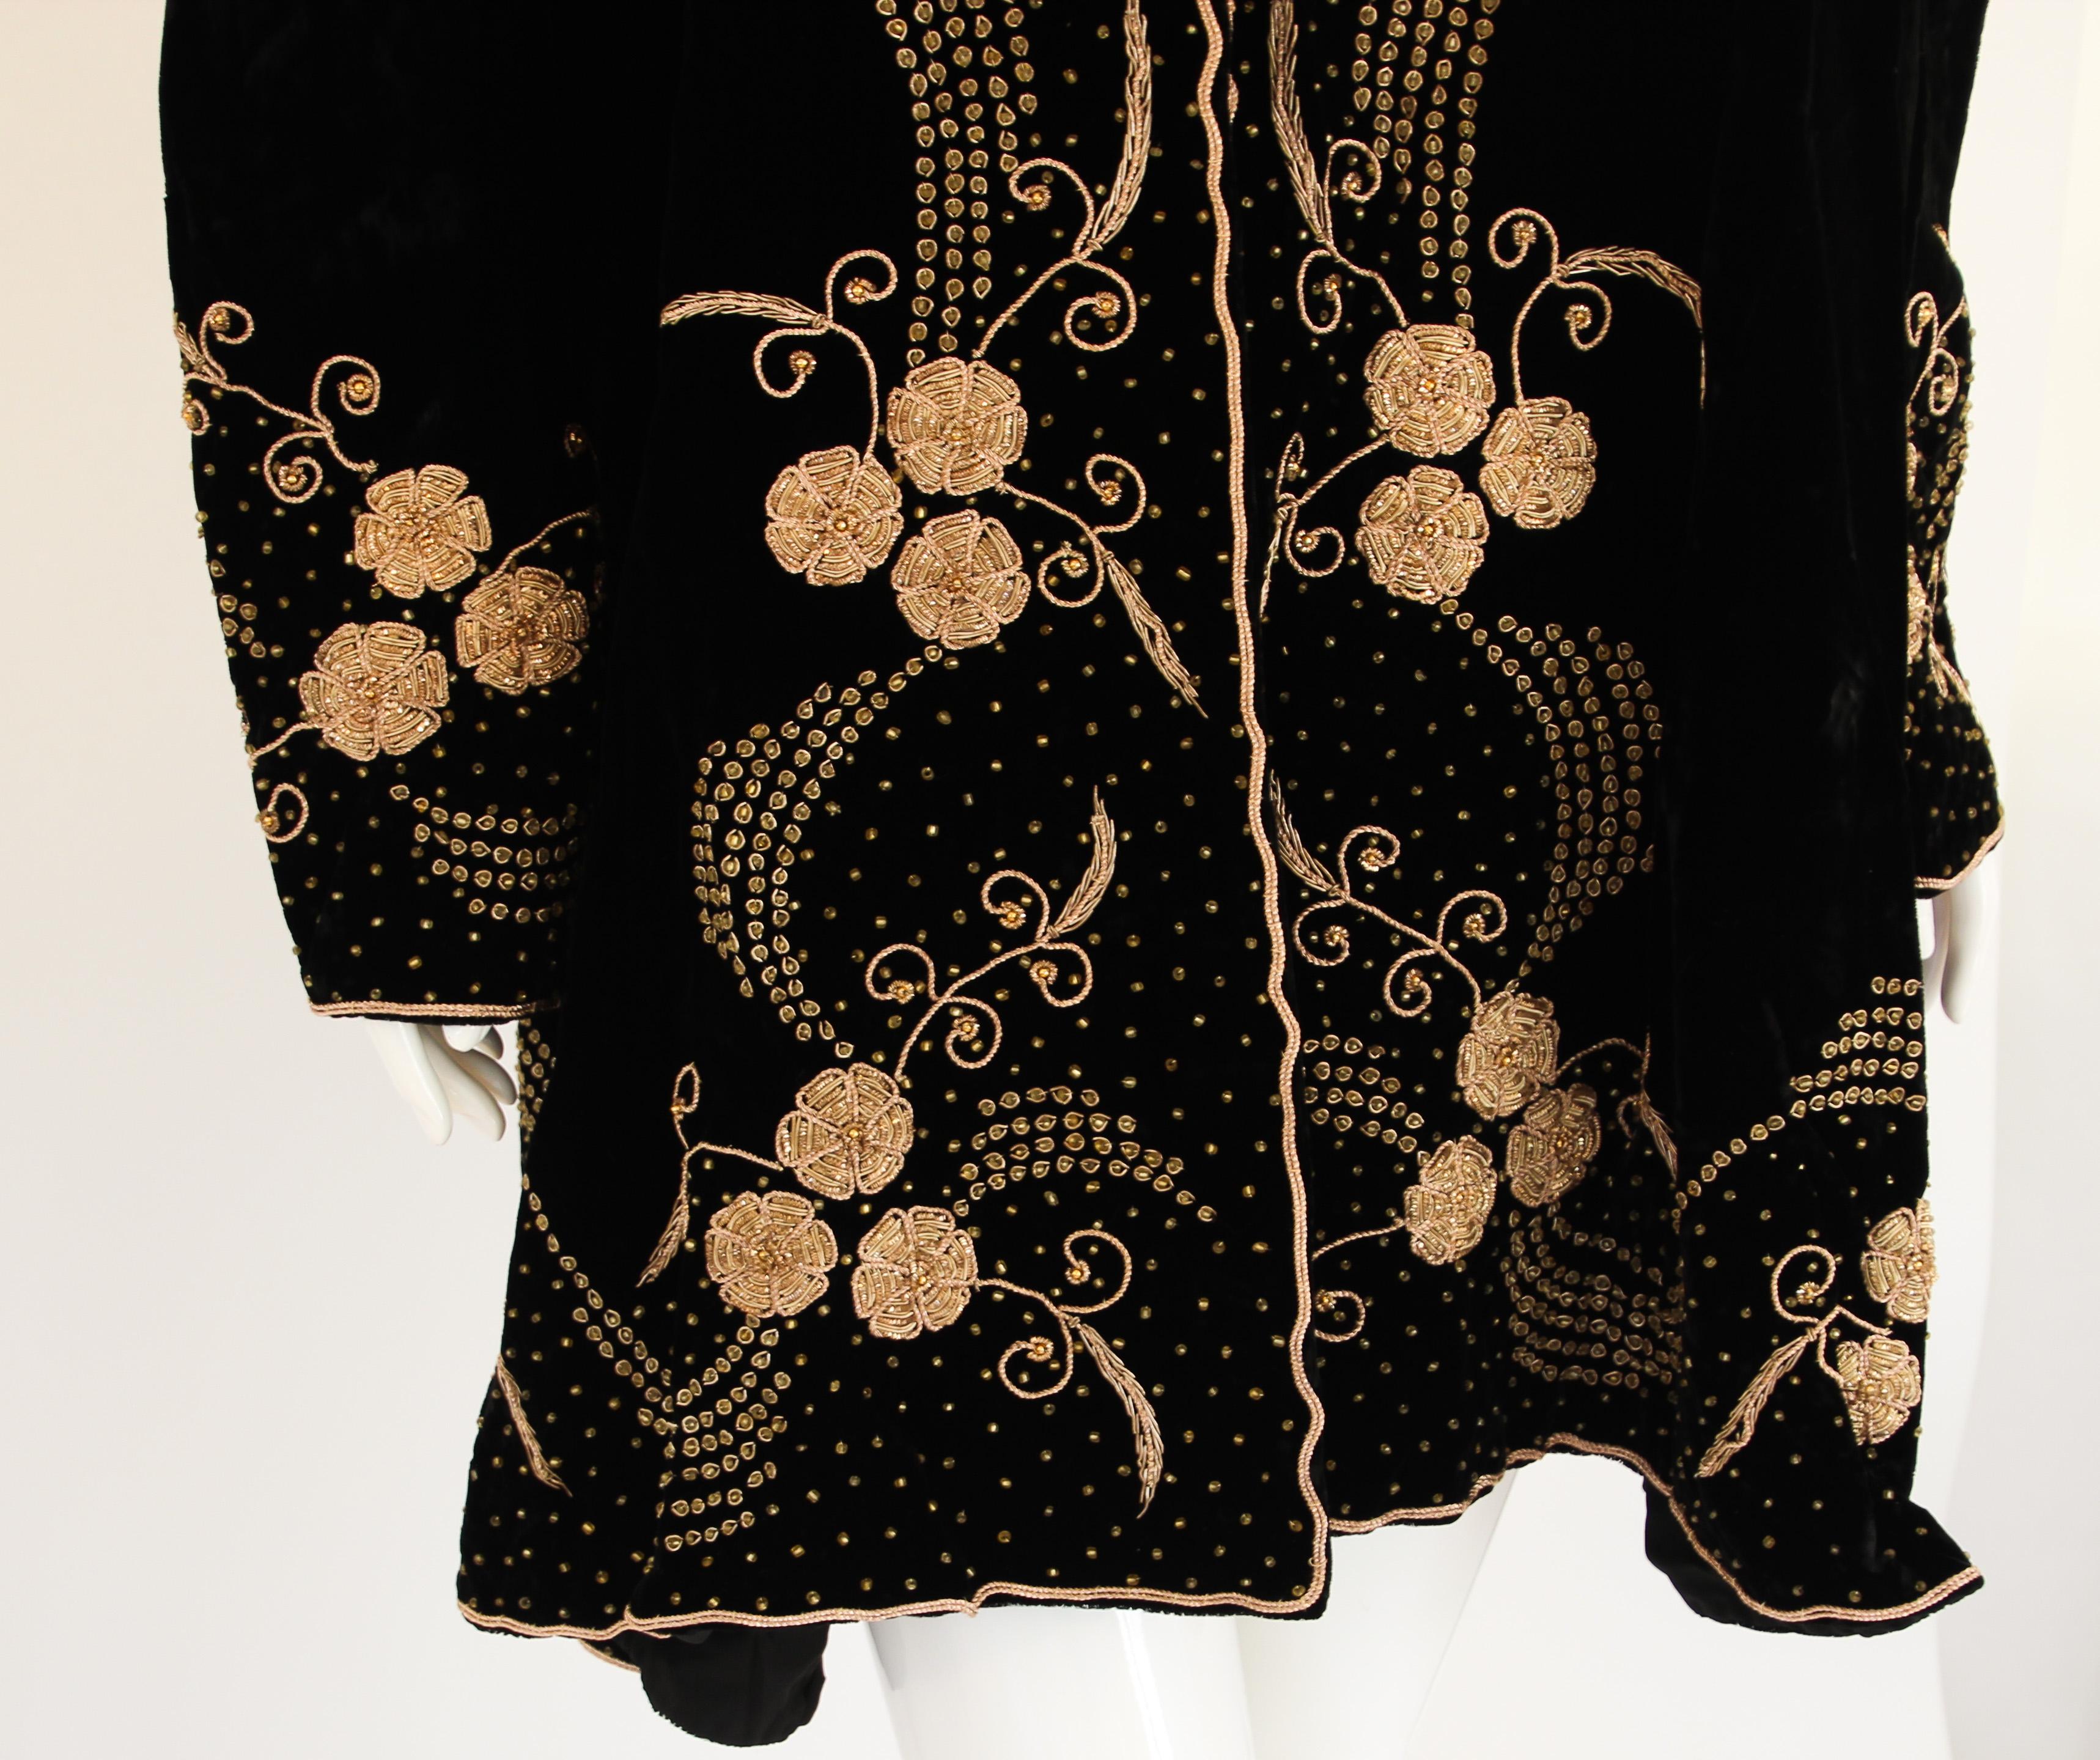 Bohemian Chic Beaded Black Velvet Jacket.
Swing coat with gold sequin and Intricate beading adds a little sparkle and shine to this velvety bohemian jacket.
Heavy beading around the collar, down the lapels, and at the bottom of the jacket and